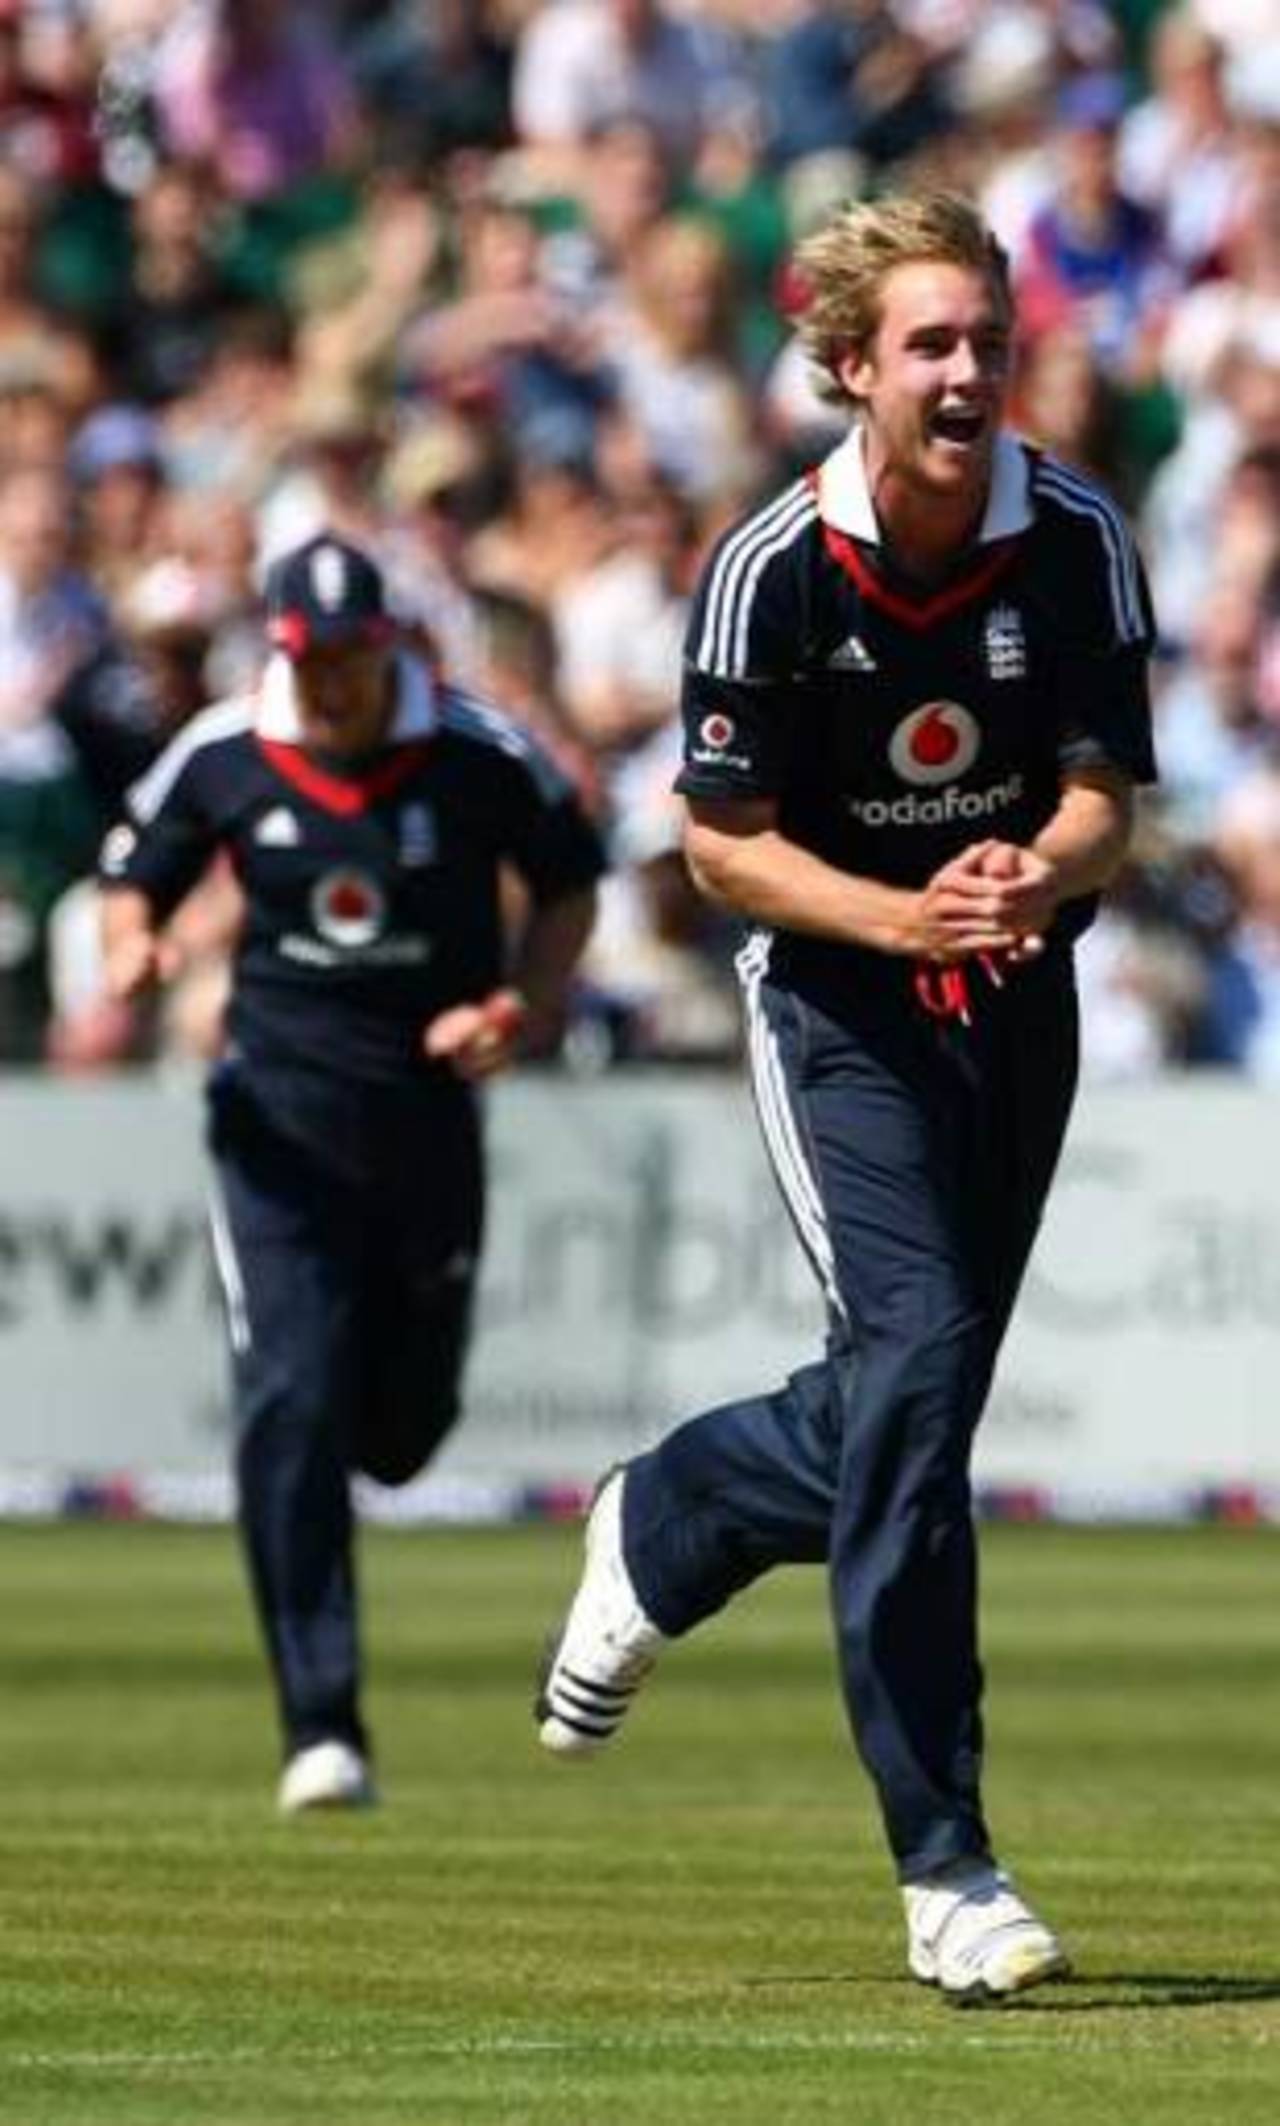 Stuart Broad collected two early wickets in an impressive spell, England v West Indies, 2nd ODI, Bristol, May 24, 2009